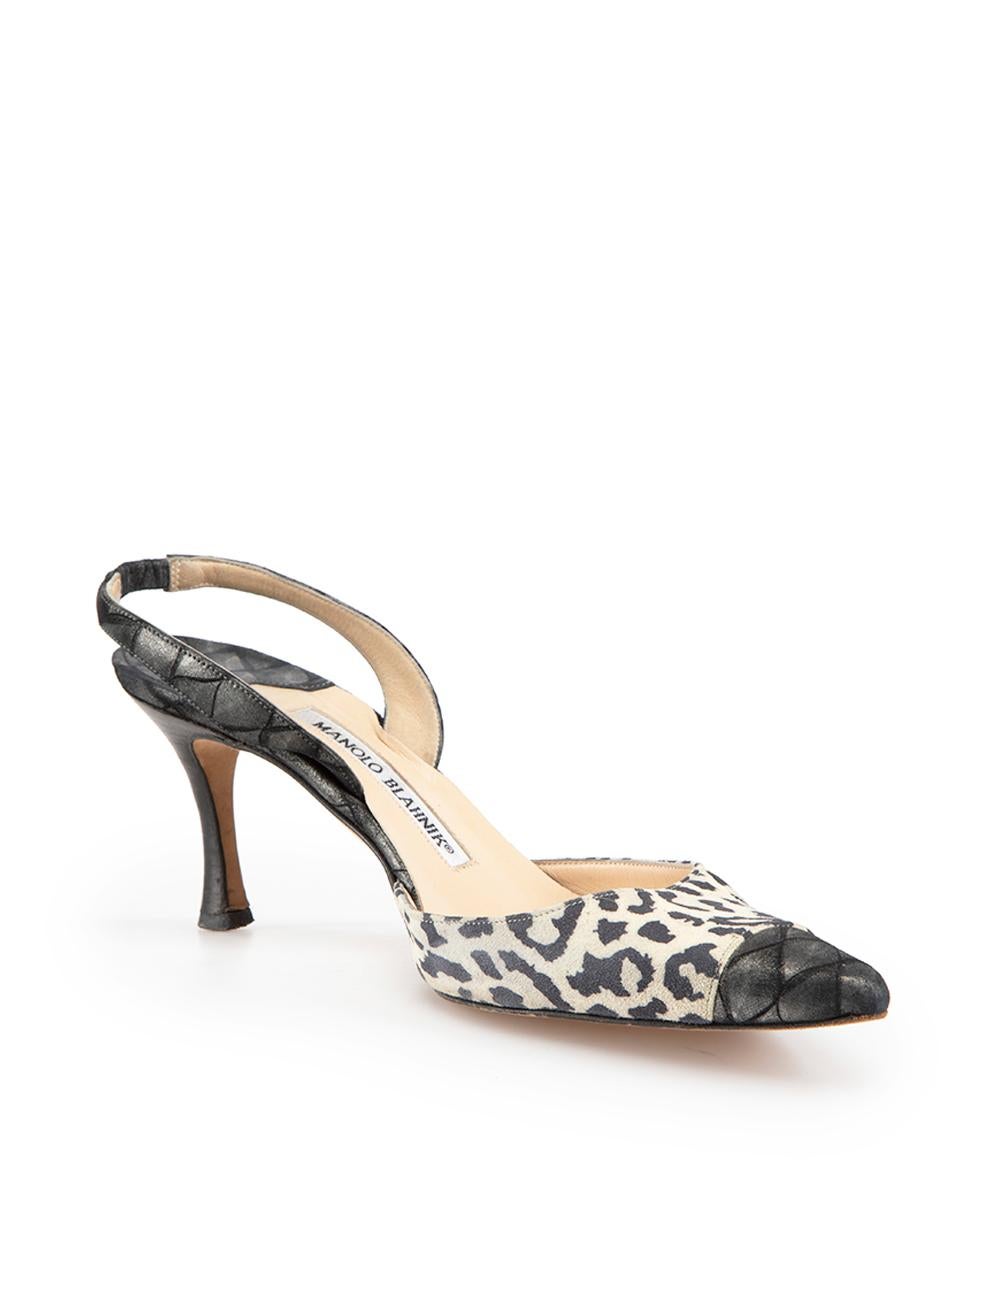 CONDITION is Good. Minor wear to shoes is evident. Light wear to both toe tips and heels with abrasions to the wood and satin on this used Manolo Blahnik designer resale item.

Details
Grey - metallic finish
Suede
Heels
Cream and black leopard print